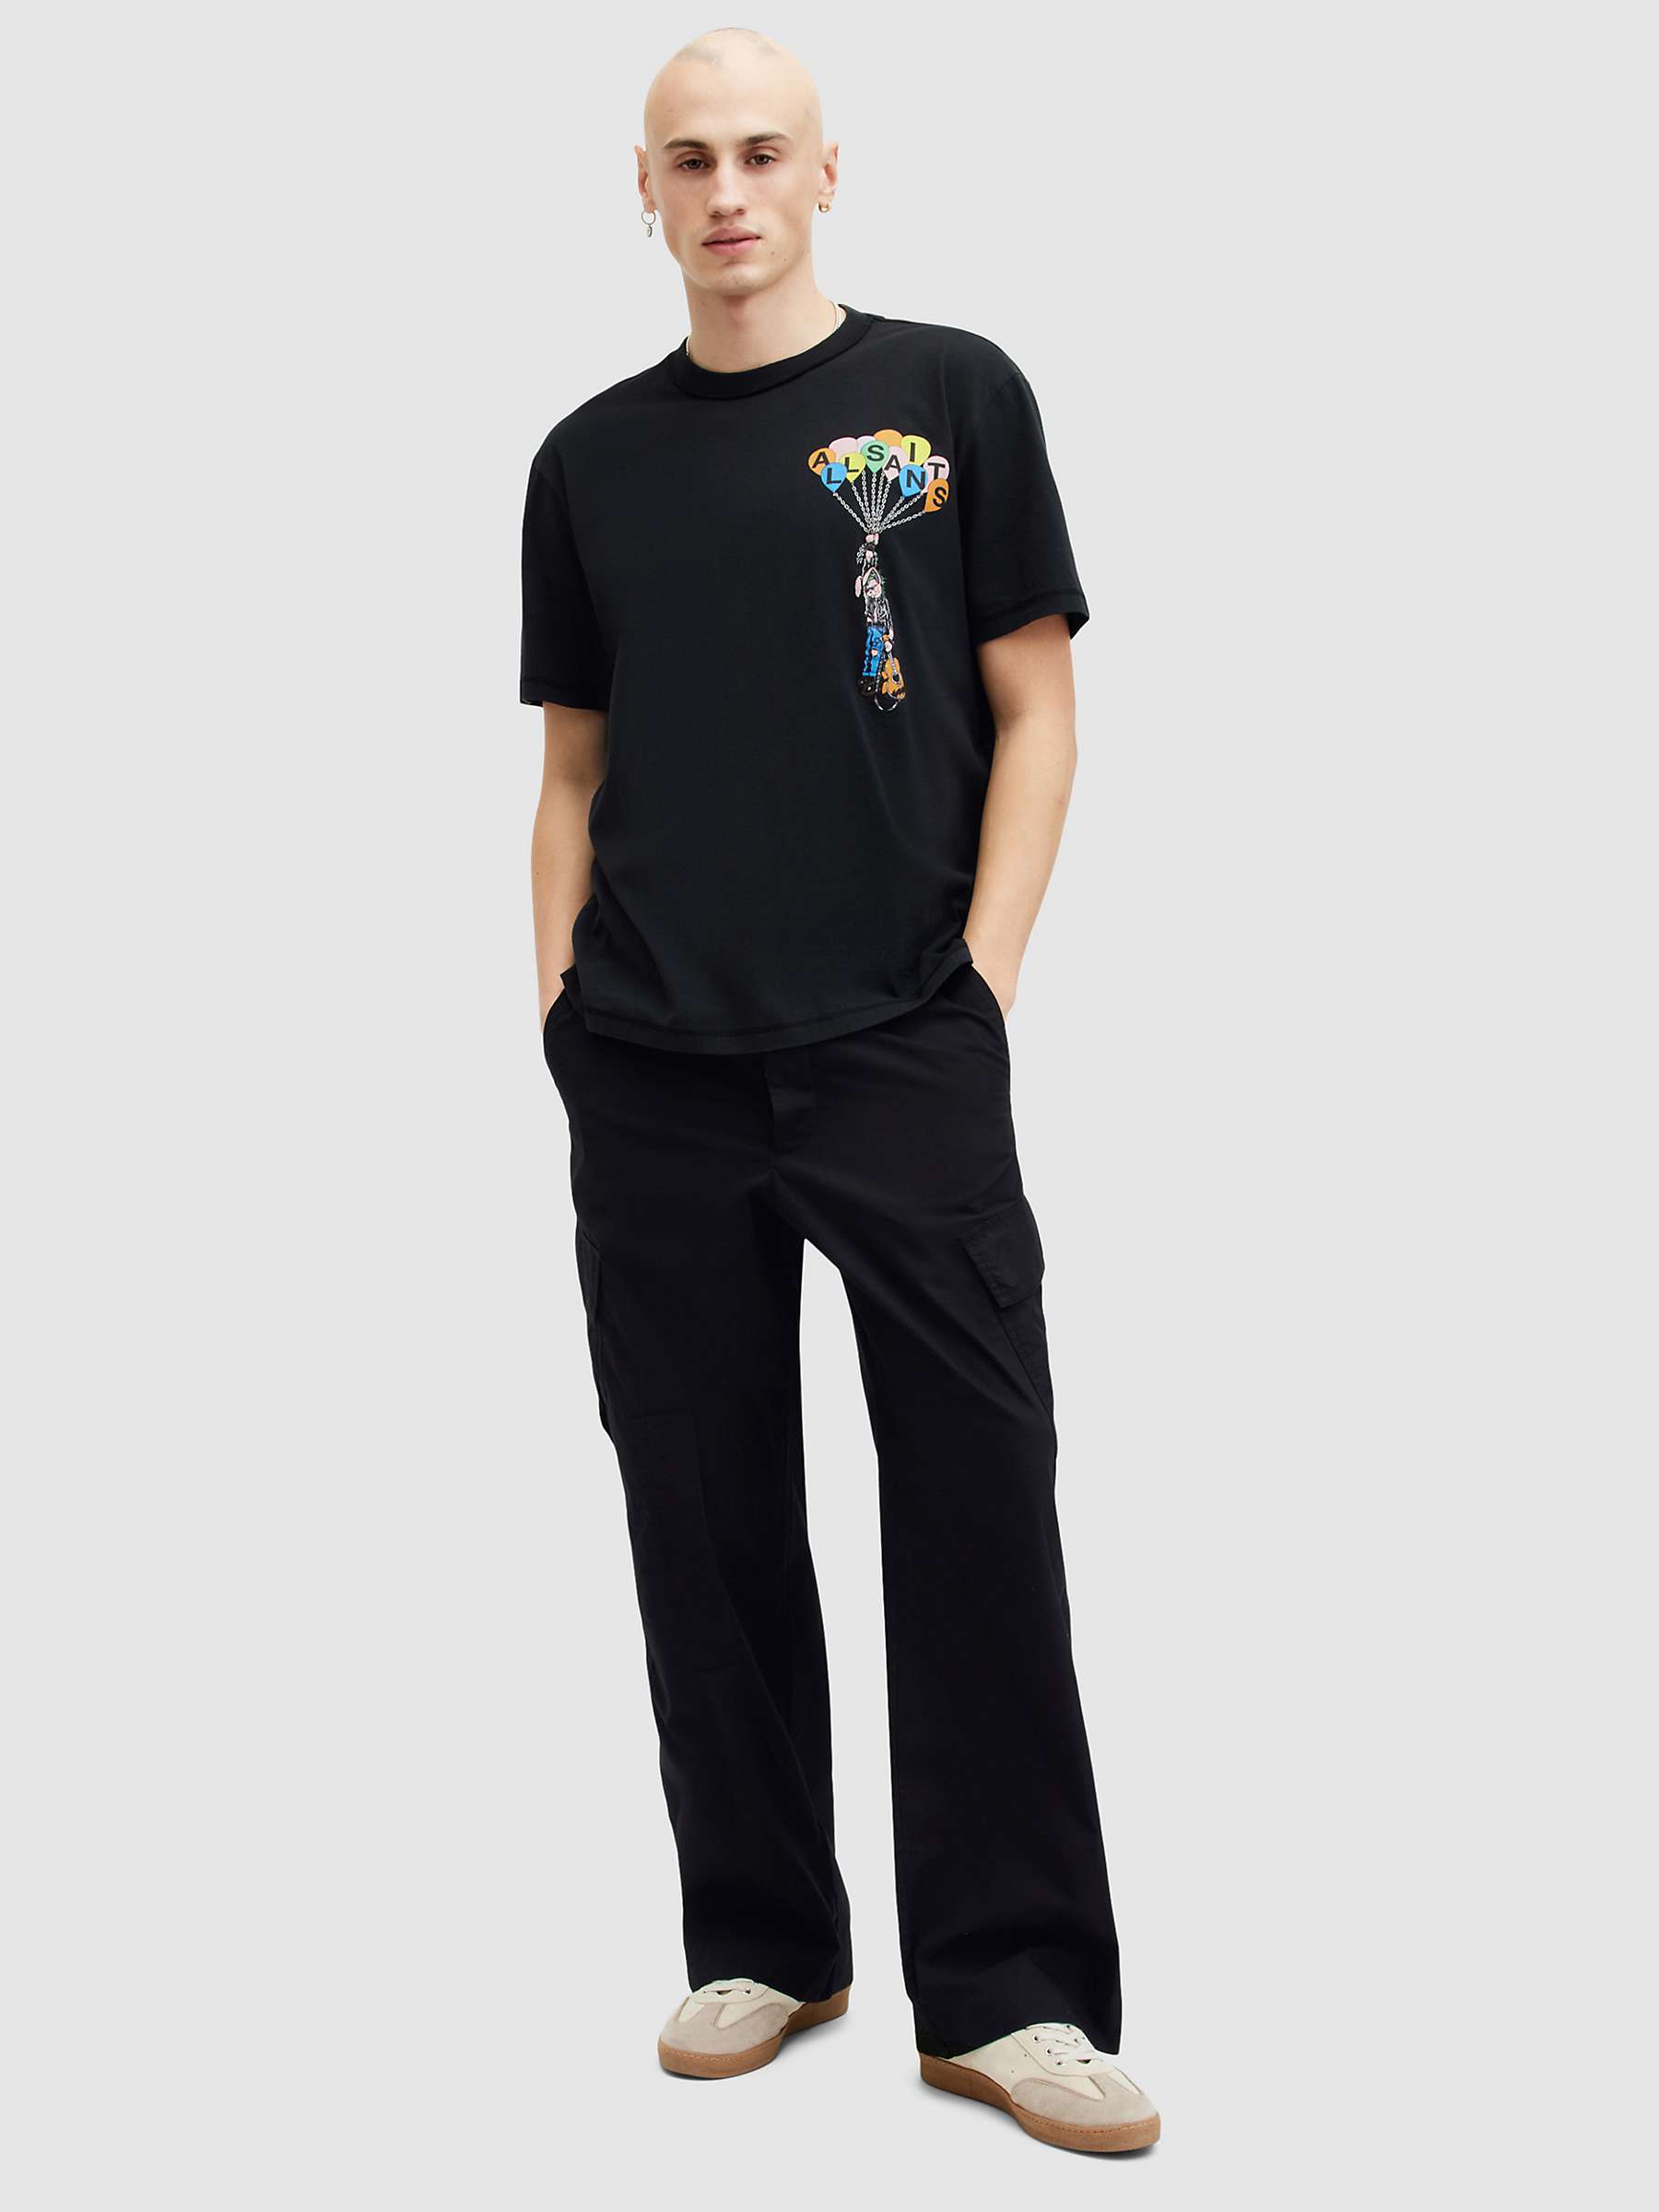 Buy AllSaints Lofty Organic Cotton Graphic Relaxed Fit T-Shirt, Washed Black/Multi Online at johnlewis.com